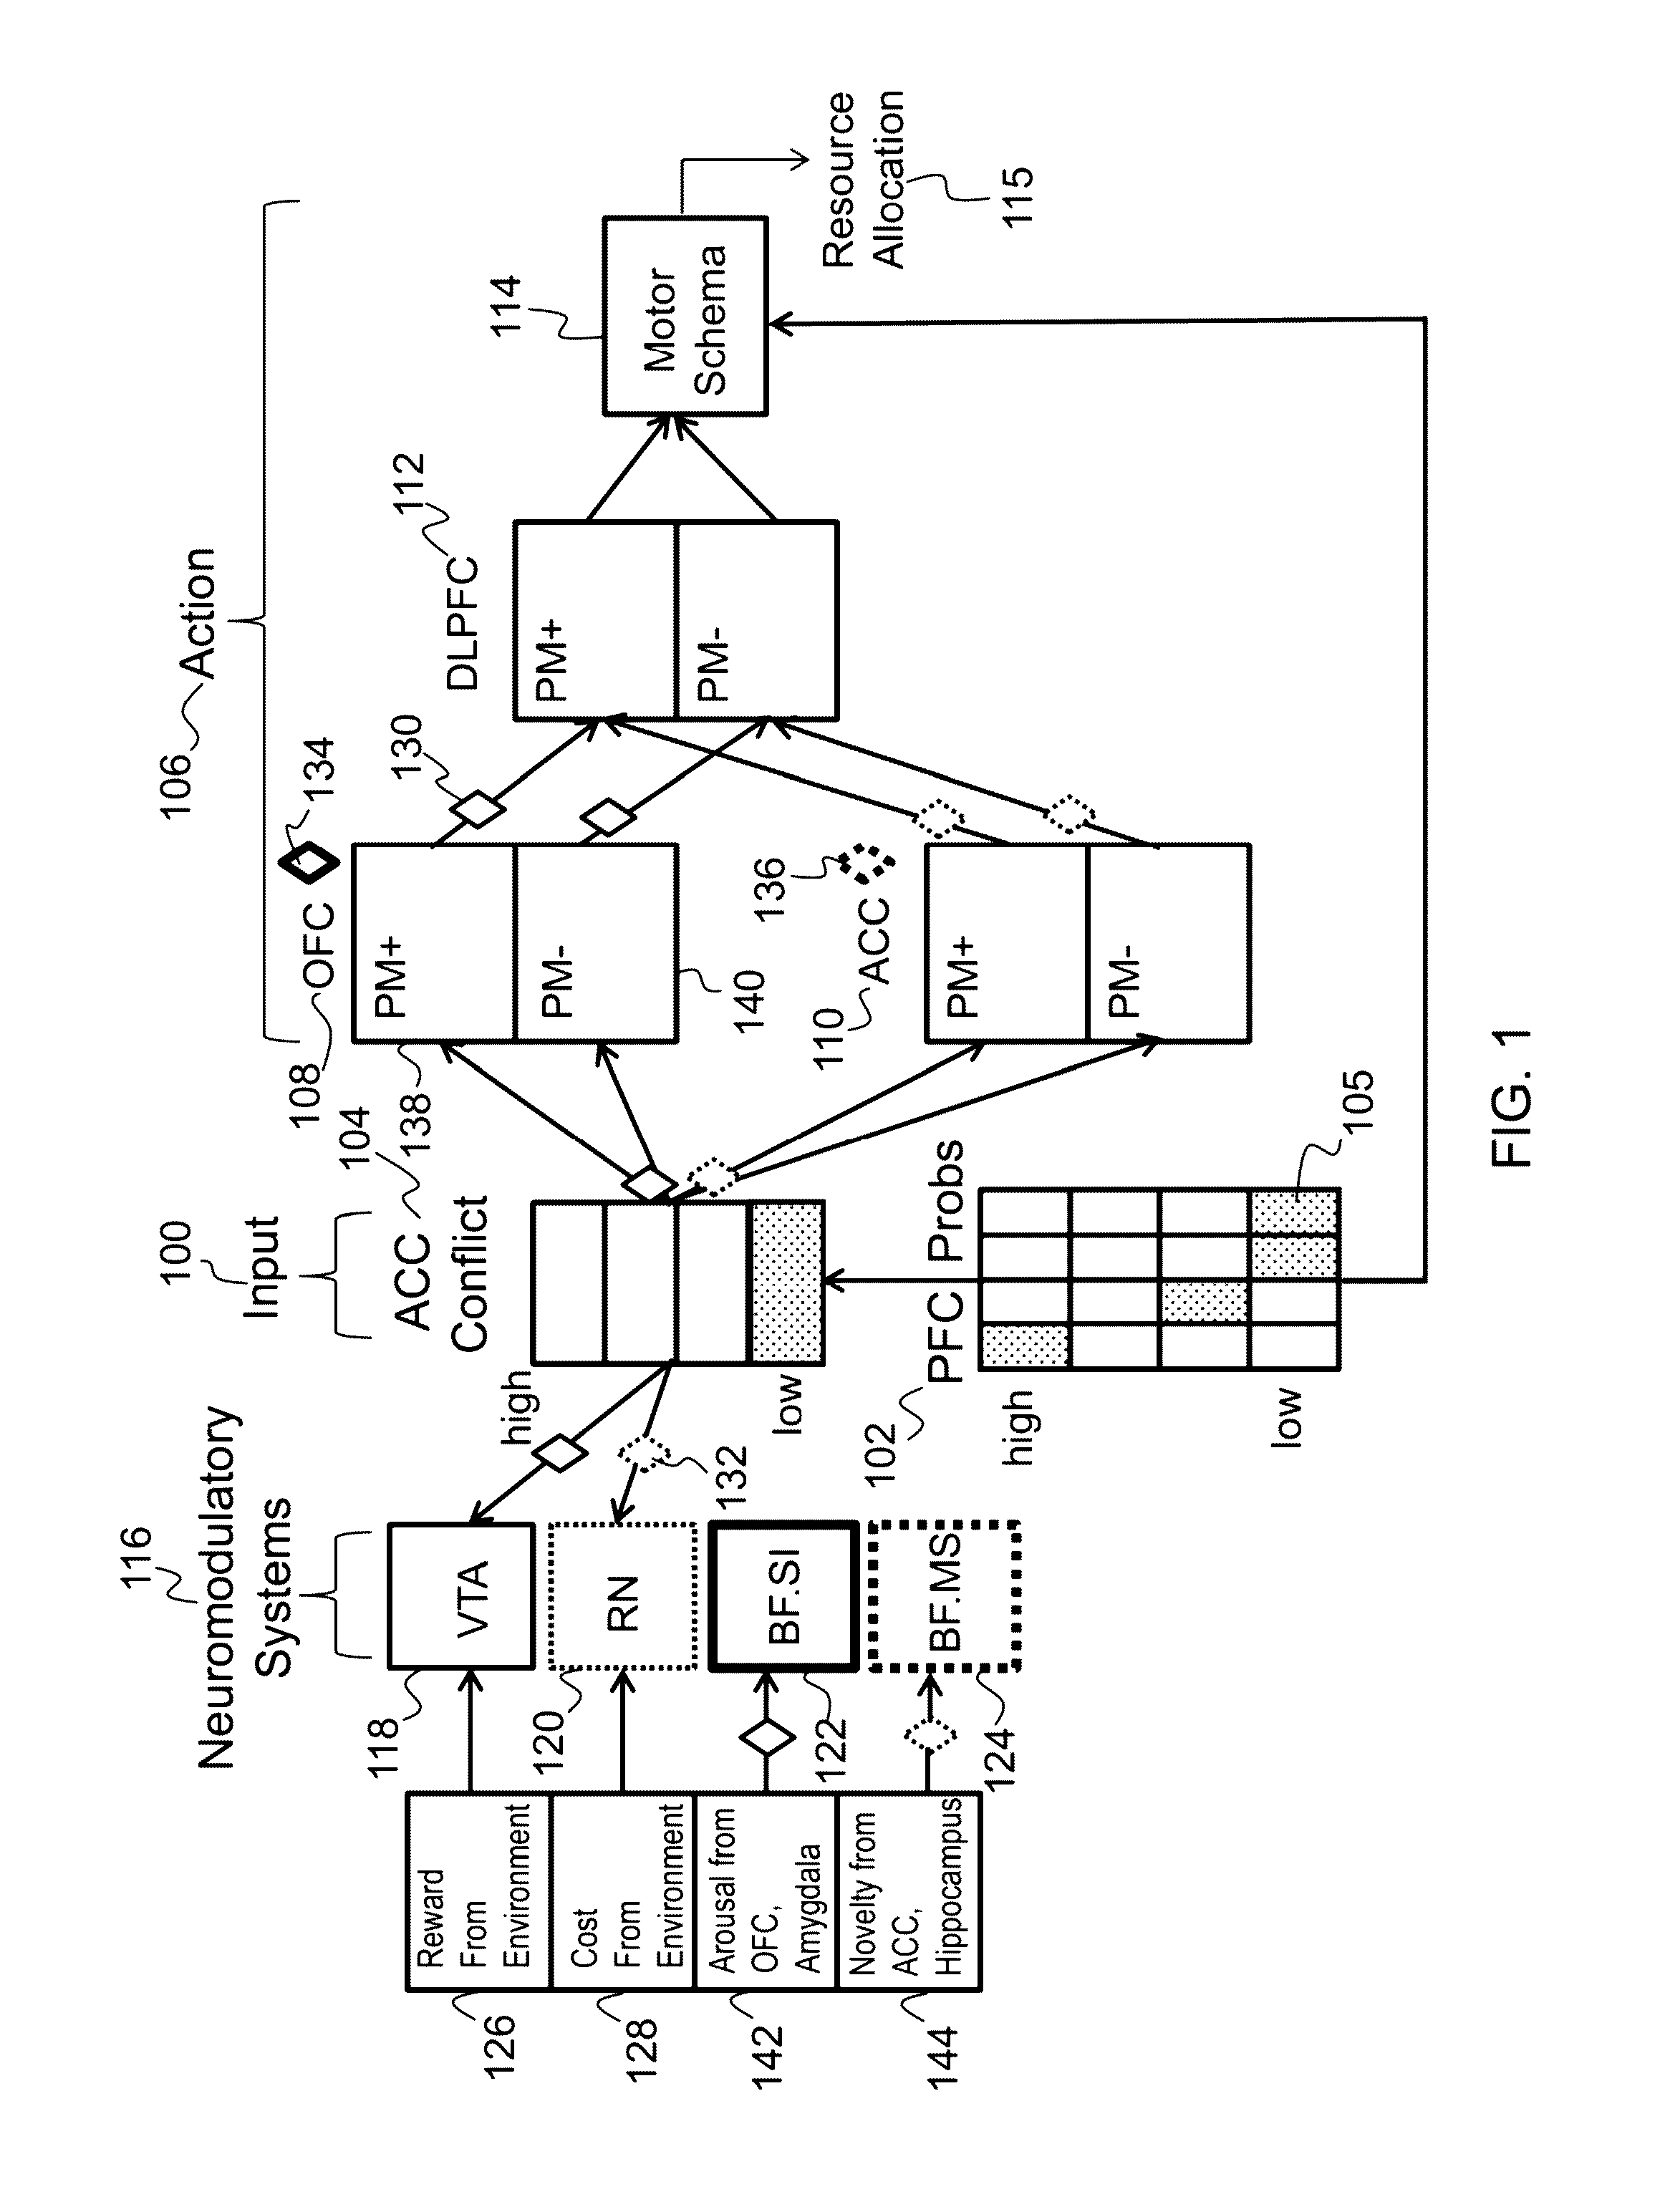 Method and apparatus for an action selection system based on a combination of neuromodulatory and prefrontal cortex area models